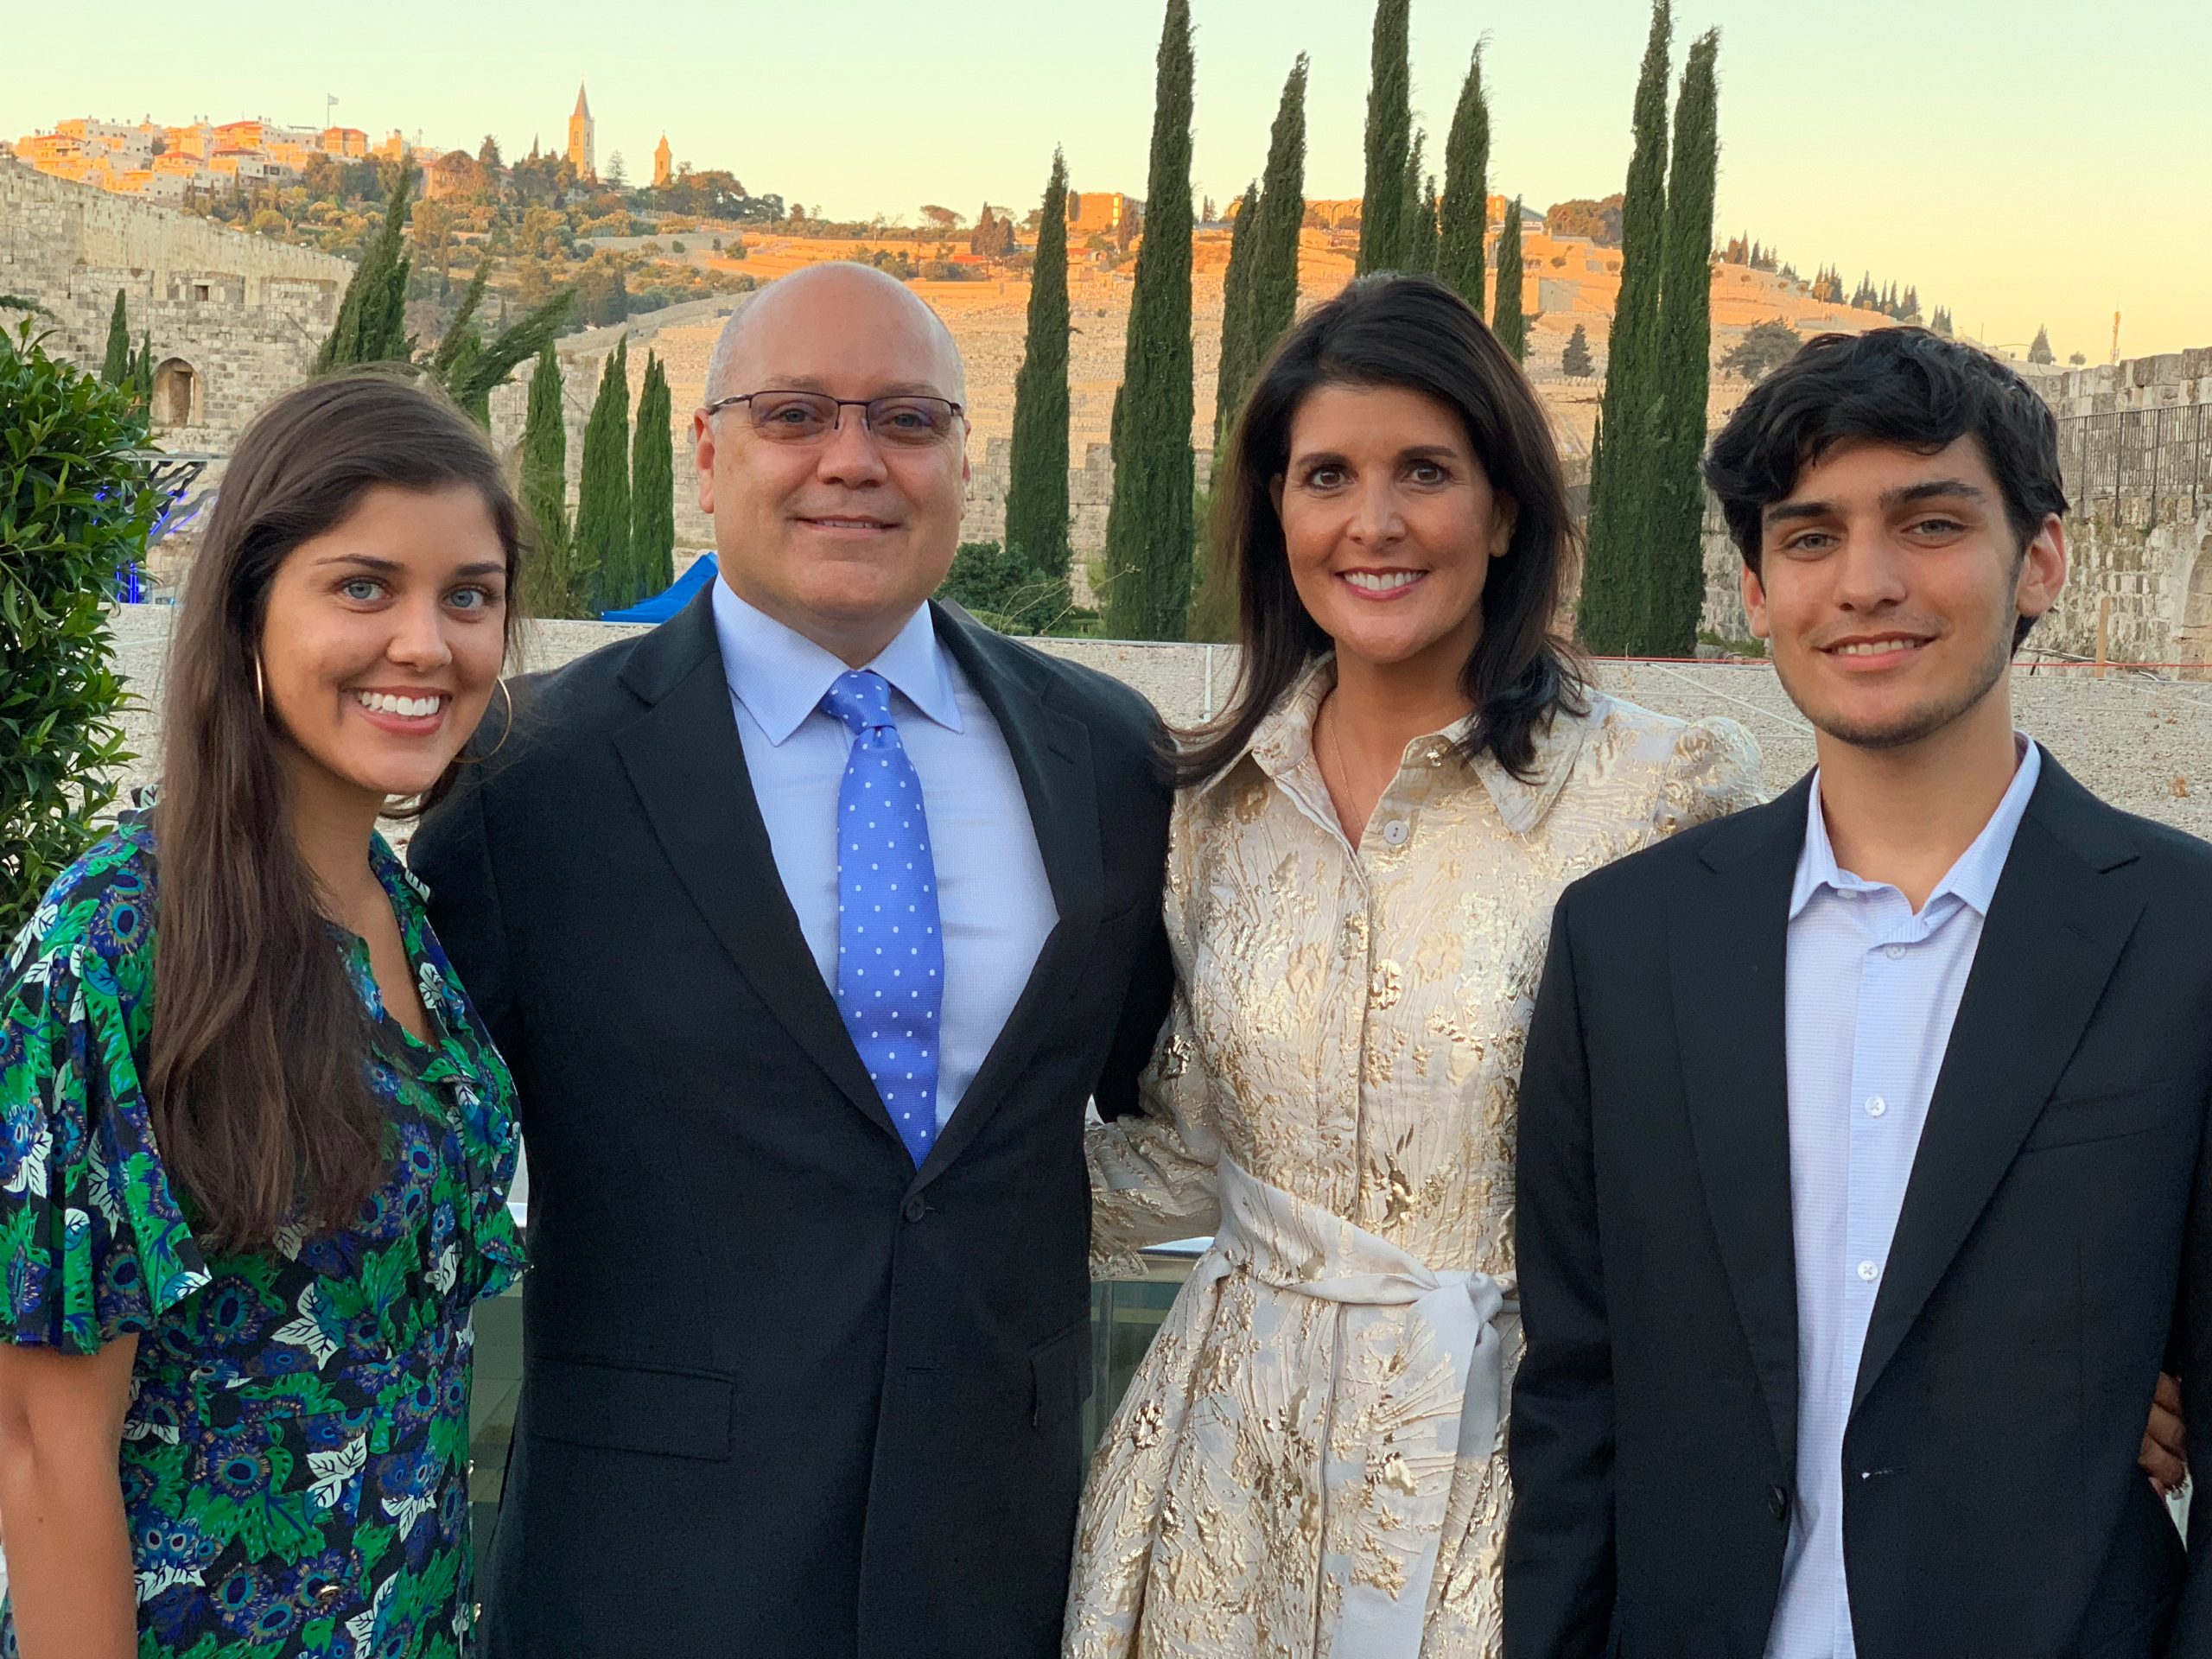 The Haley family at the Western Wall, Old City of Jerusalem, Israel, in June 2019. 
